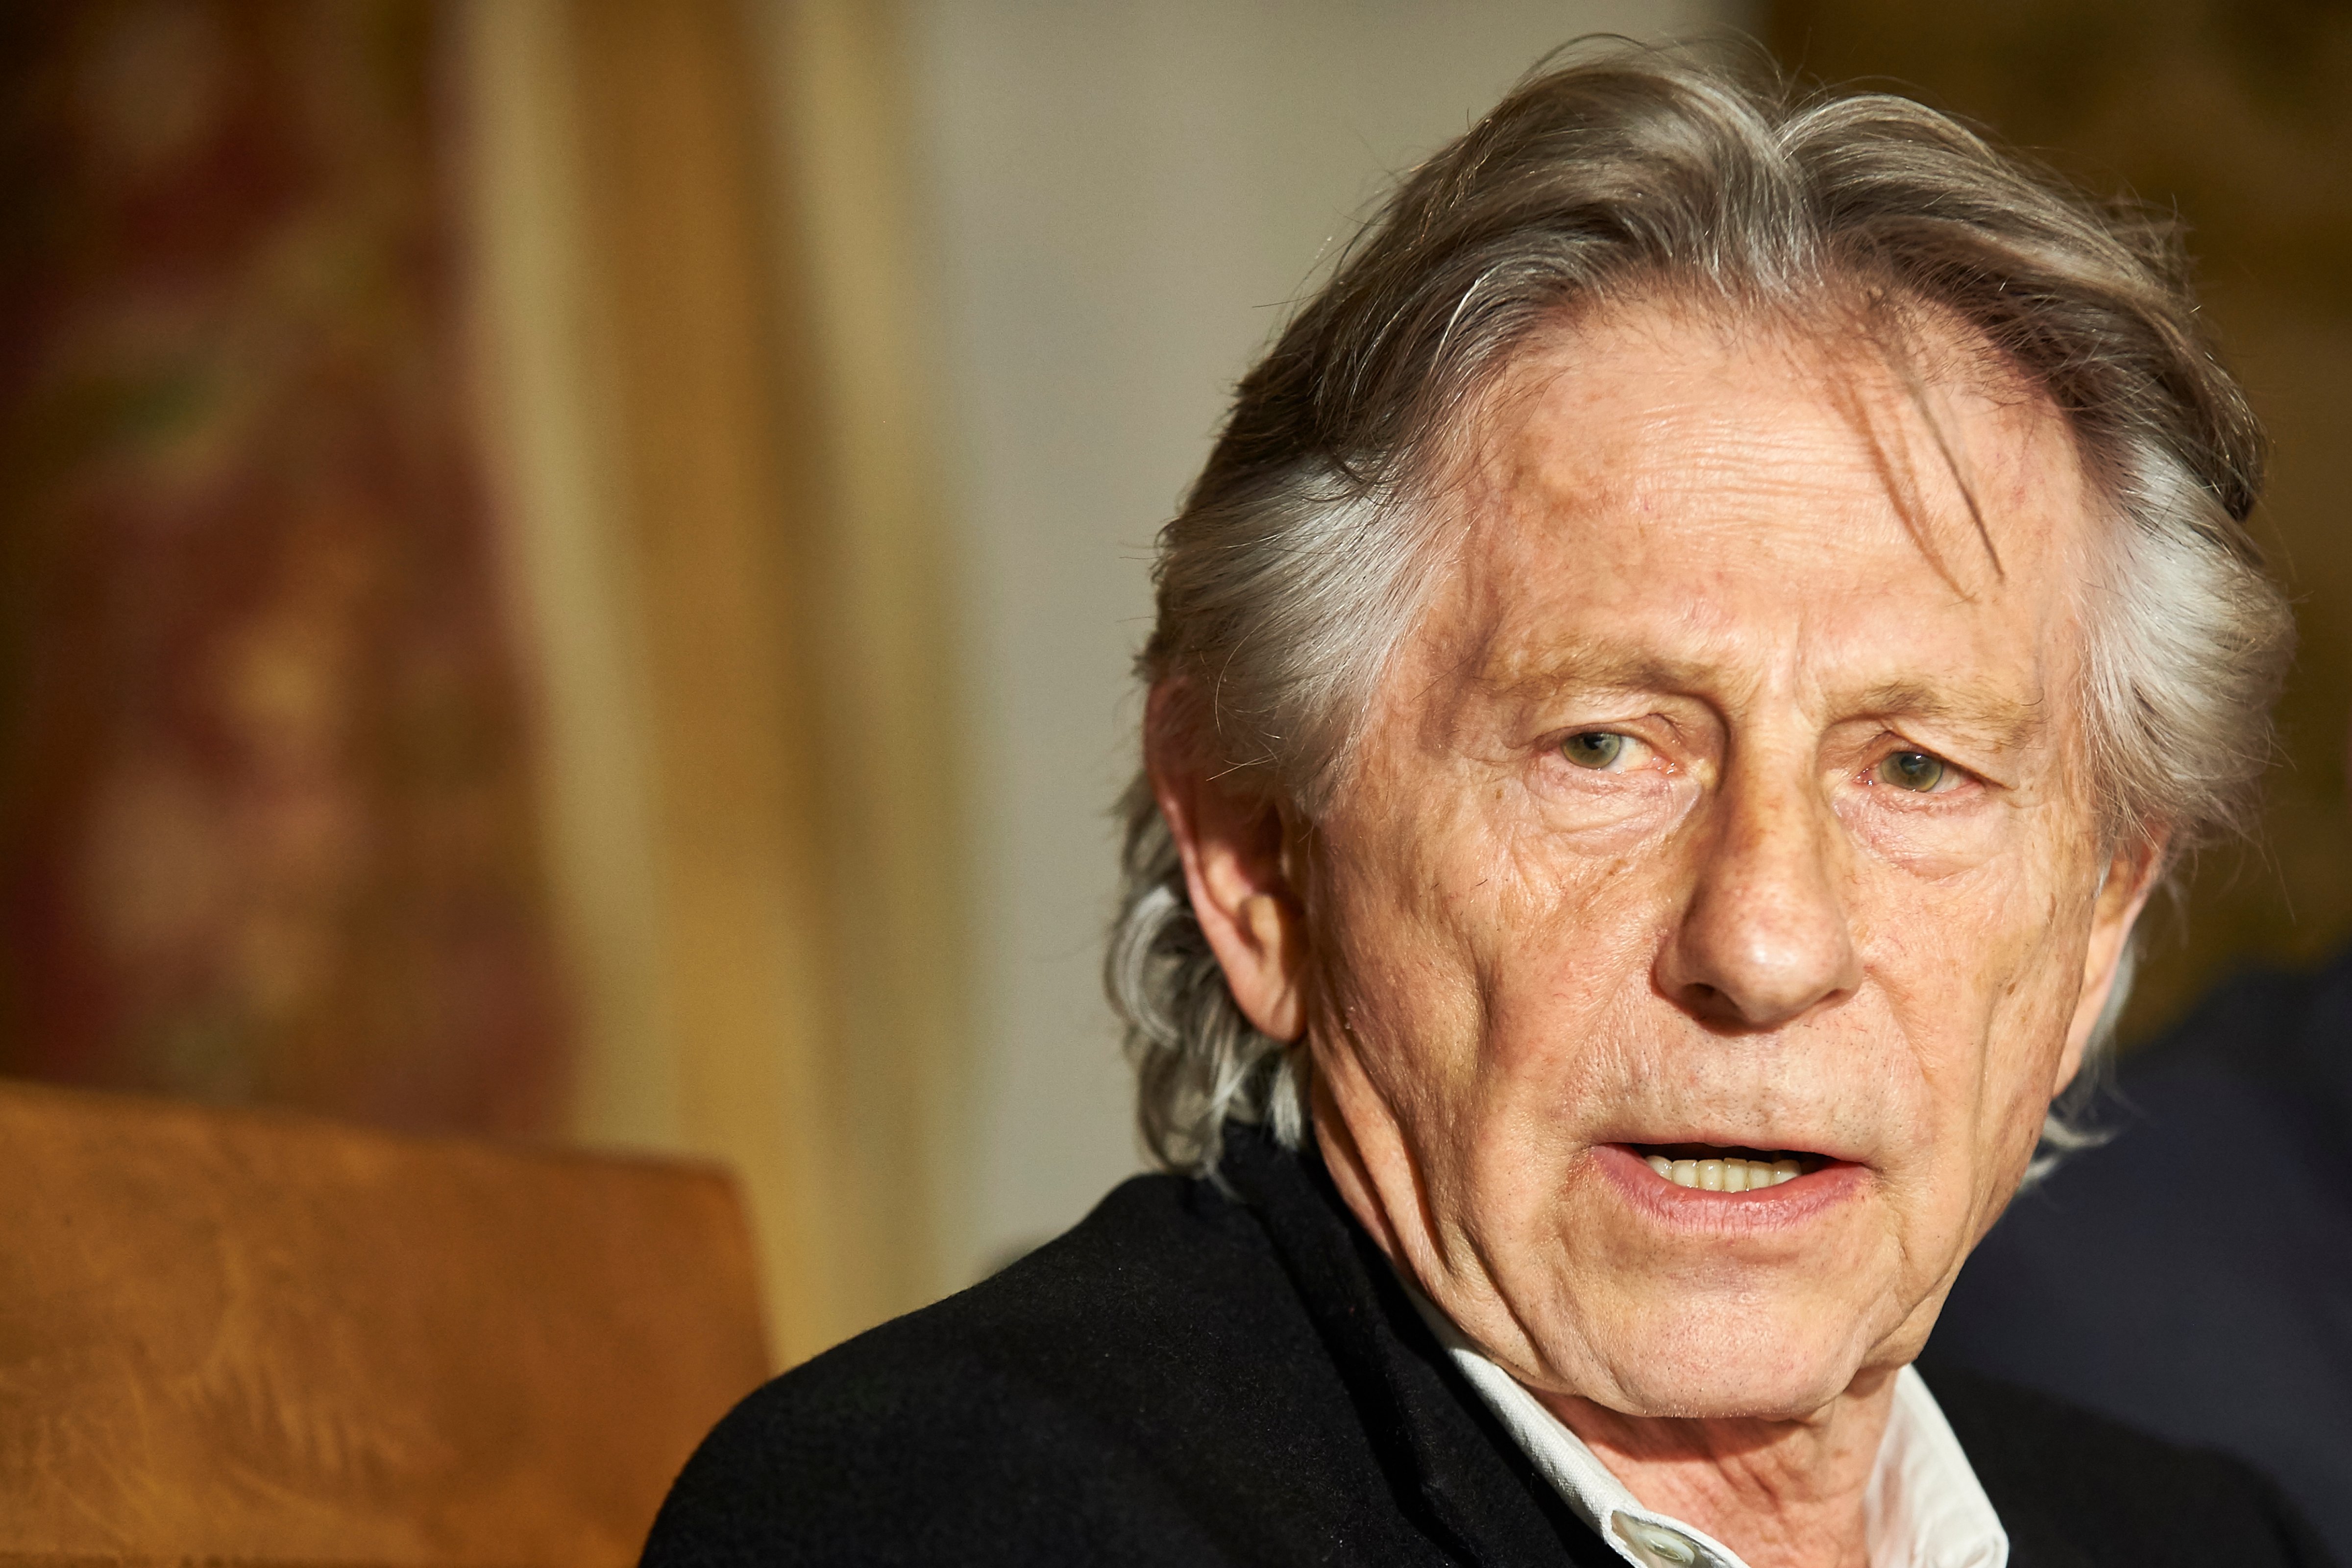 French-Polish film director Roman Polanski arrives to attend a press conference at the Bonarowski Palace Hotel on October 30, 2015 in Krakow, Poland.